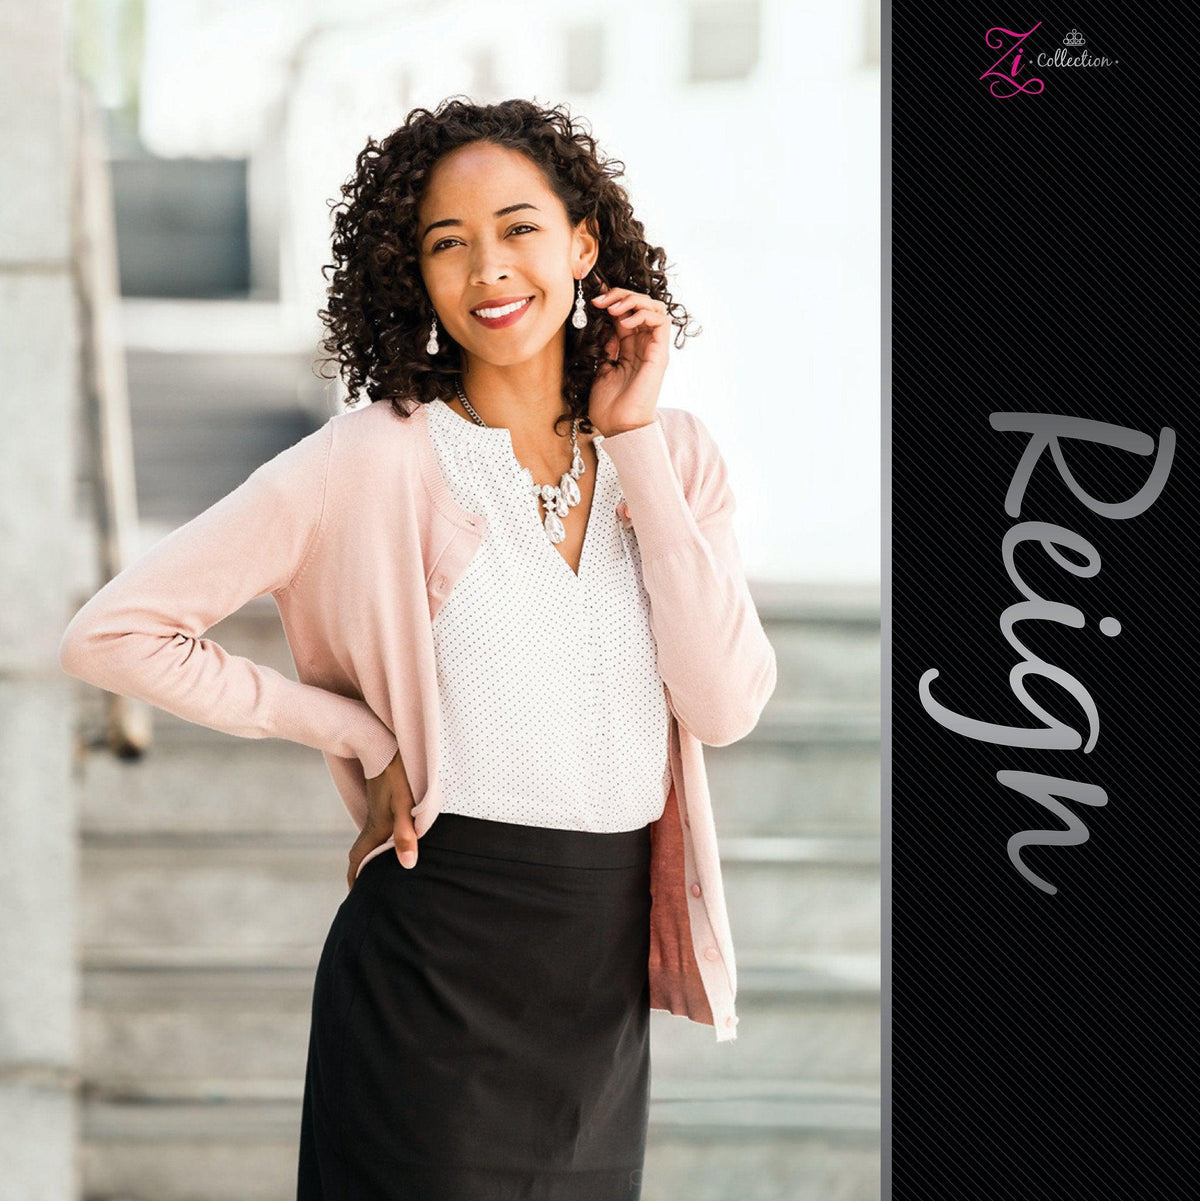 Reign 2019 Zi Collection Necklace and matching Earrings - Paparazzi Accessories-CarasShop.com - $5 Jewelry by Cara Jewels